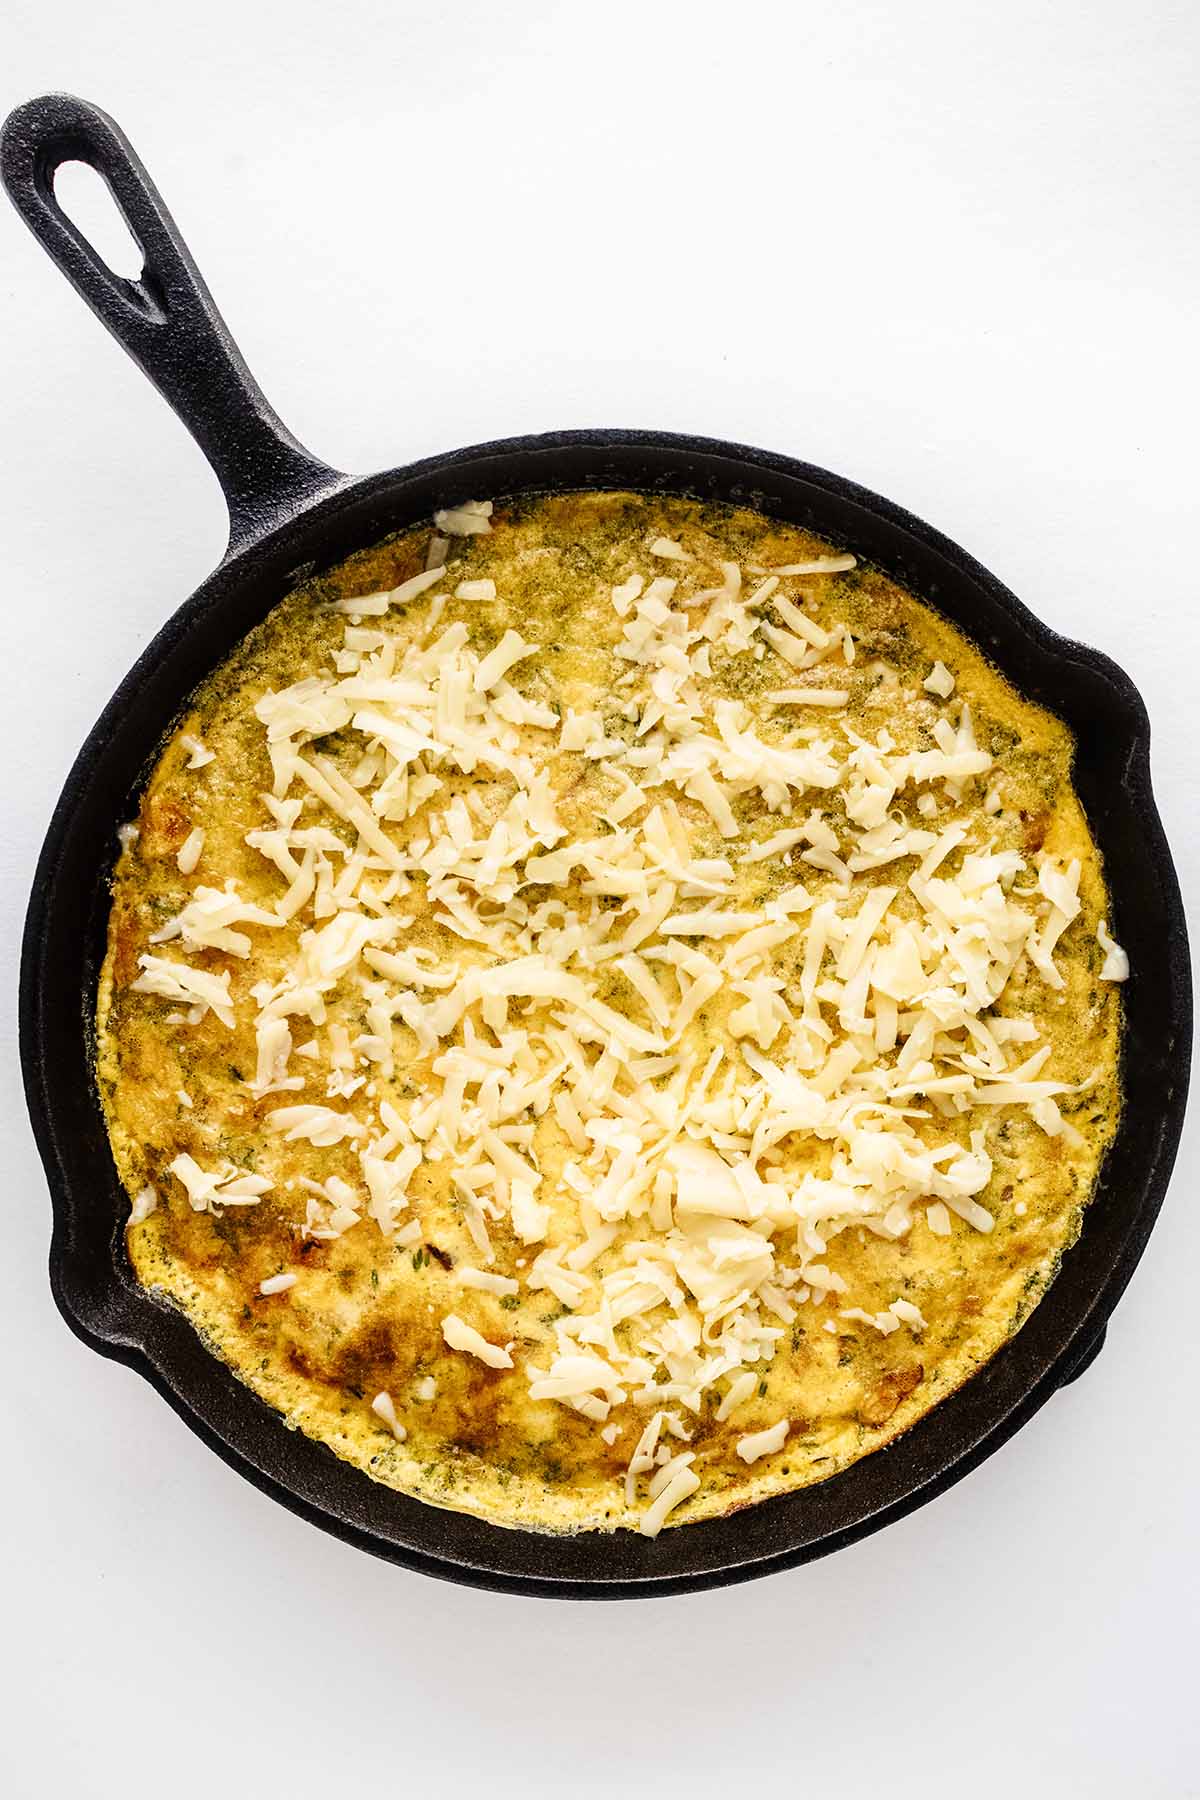 Overhead view of partially cooked frittata topped with grated cheese in a cast iron skillet.